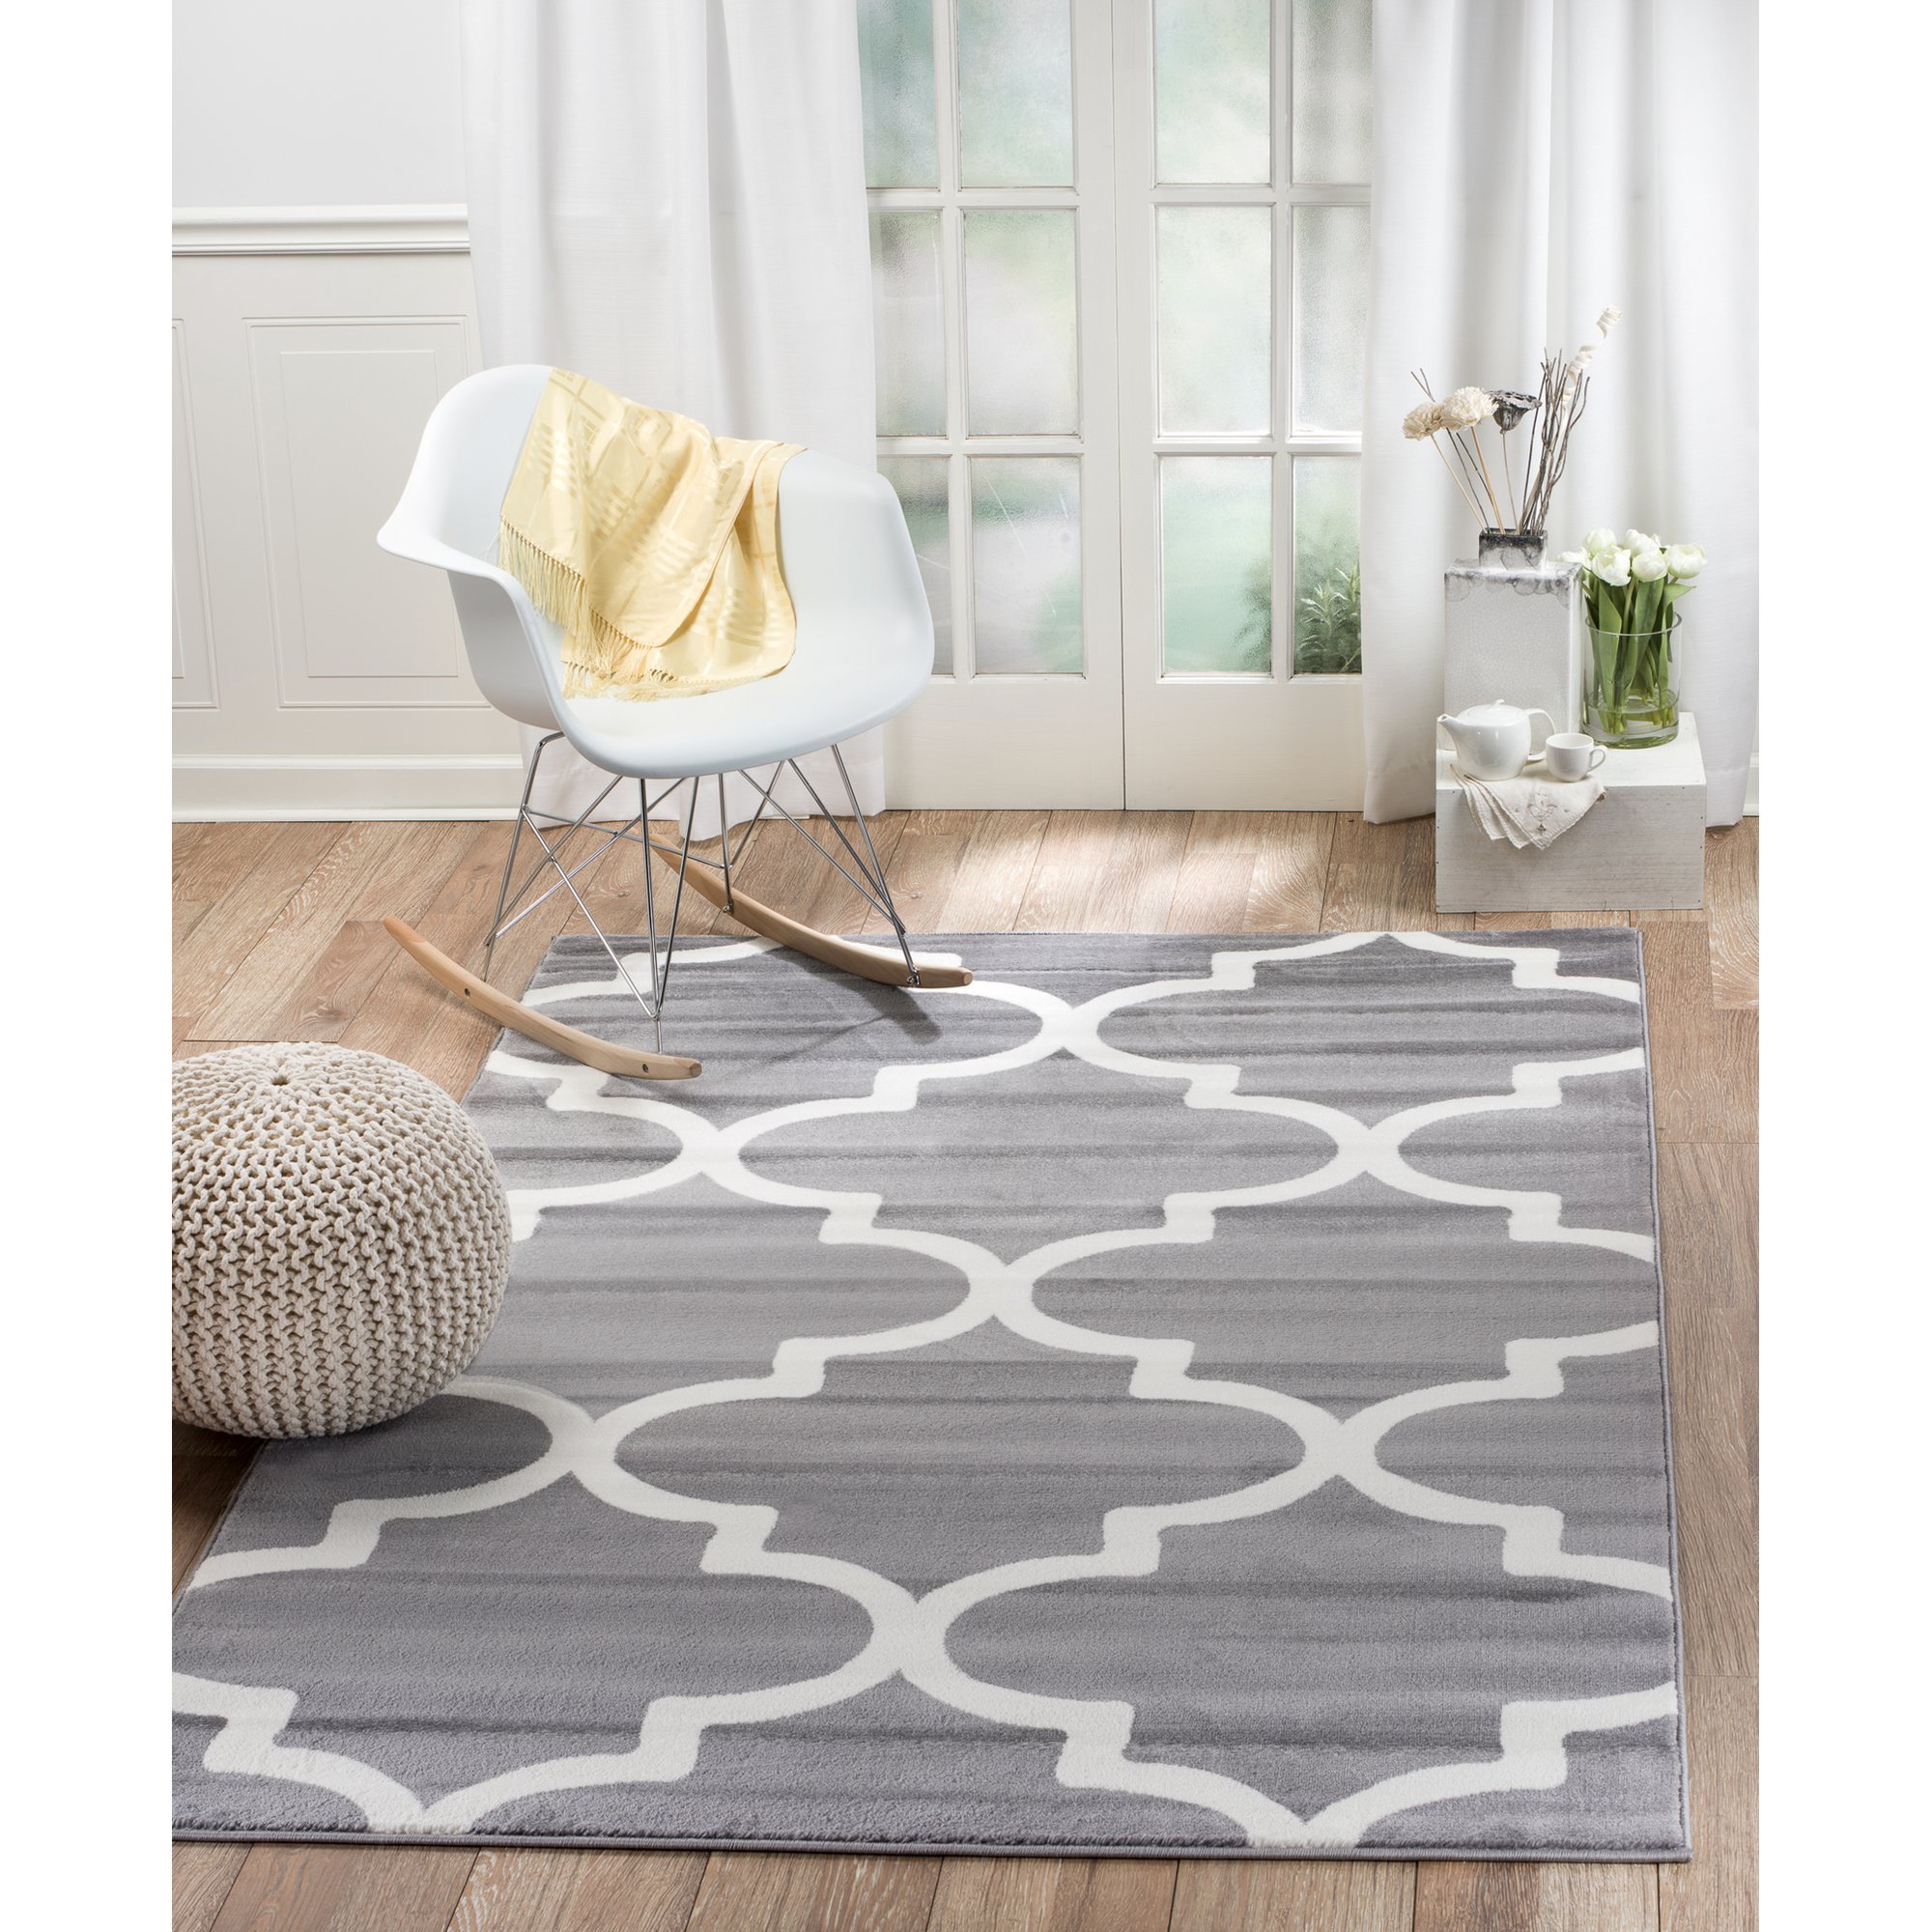 Up to 70% f Neutral & Earth Tone Area Rugs The Krazy Coupon Lady